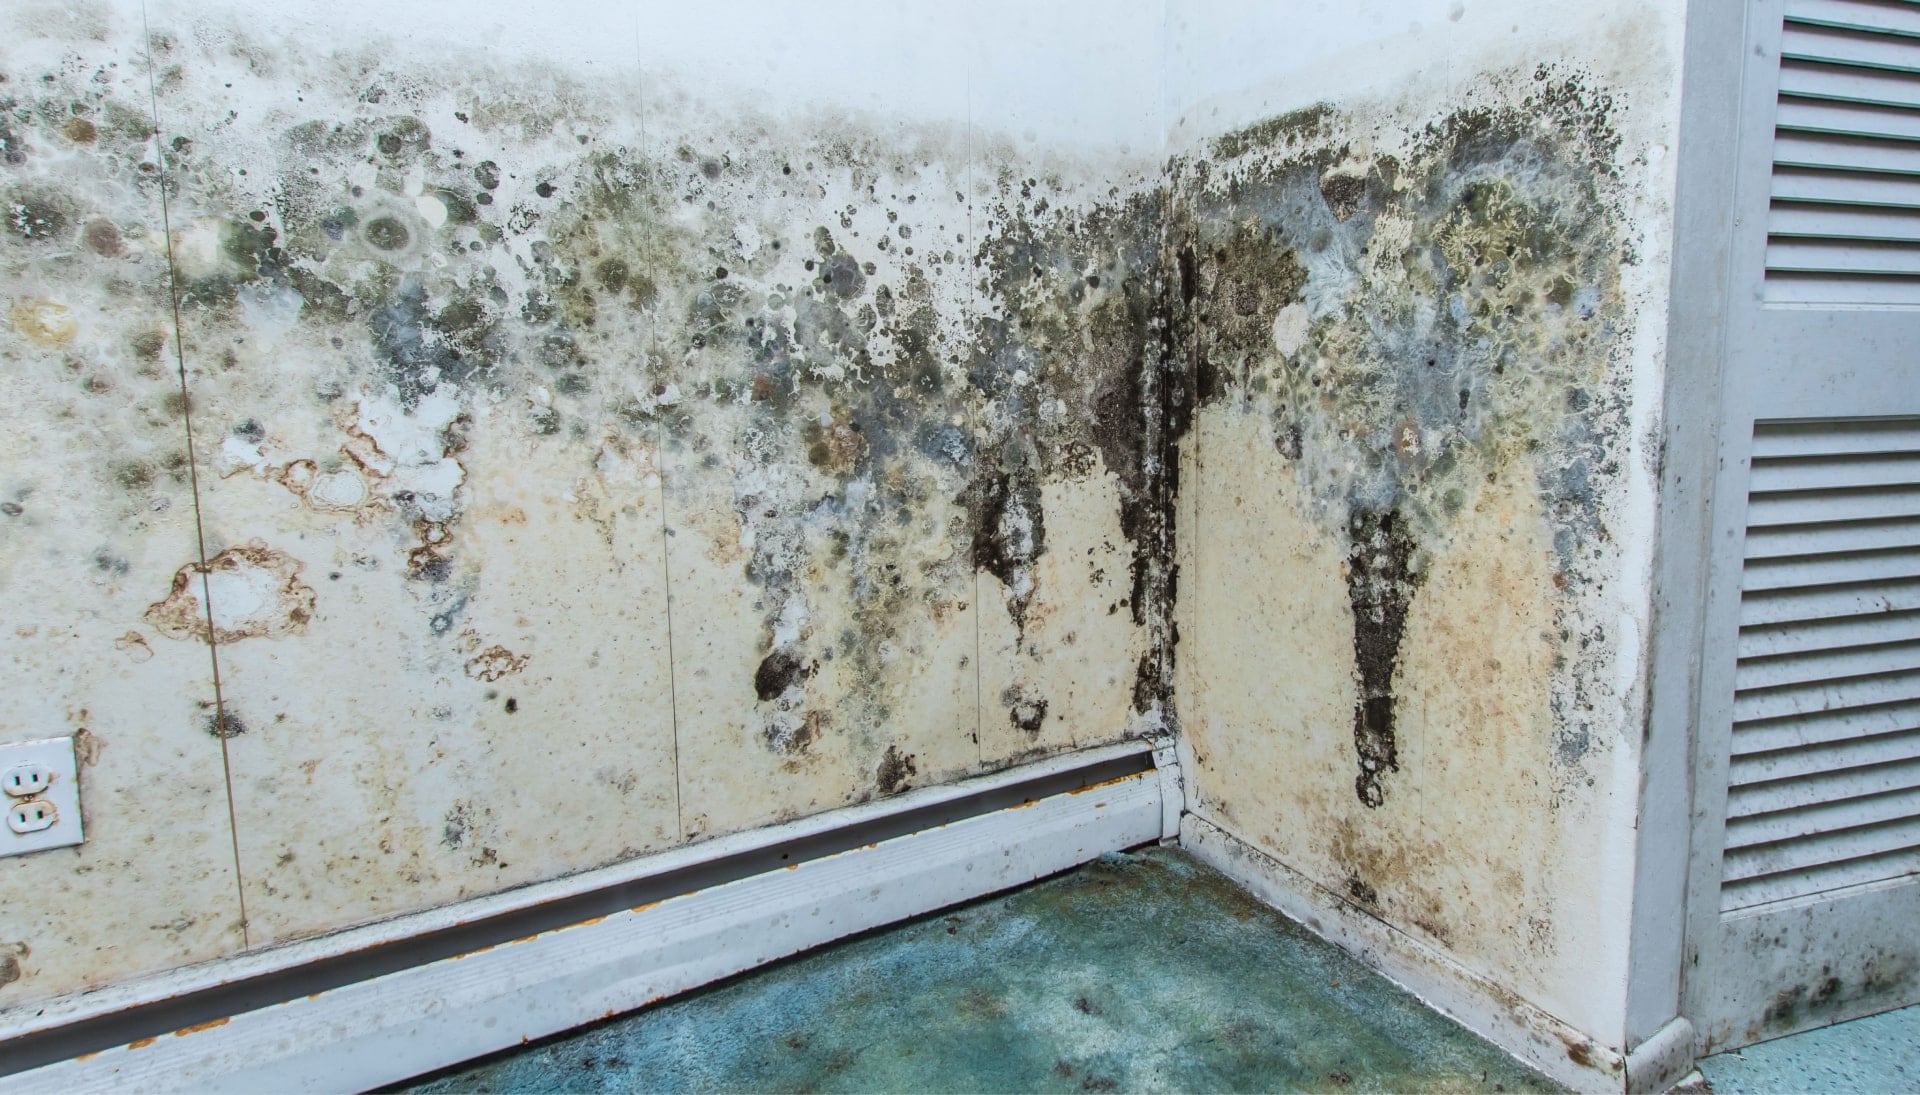 Professional mold removal, odor control, and water damage restoration service in St Louis, Missouri.